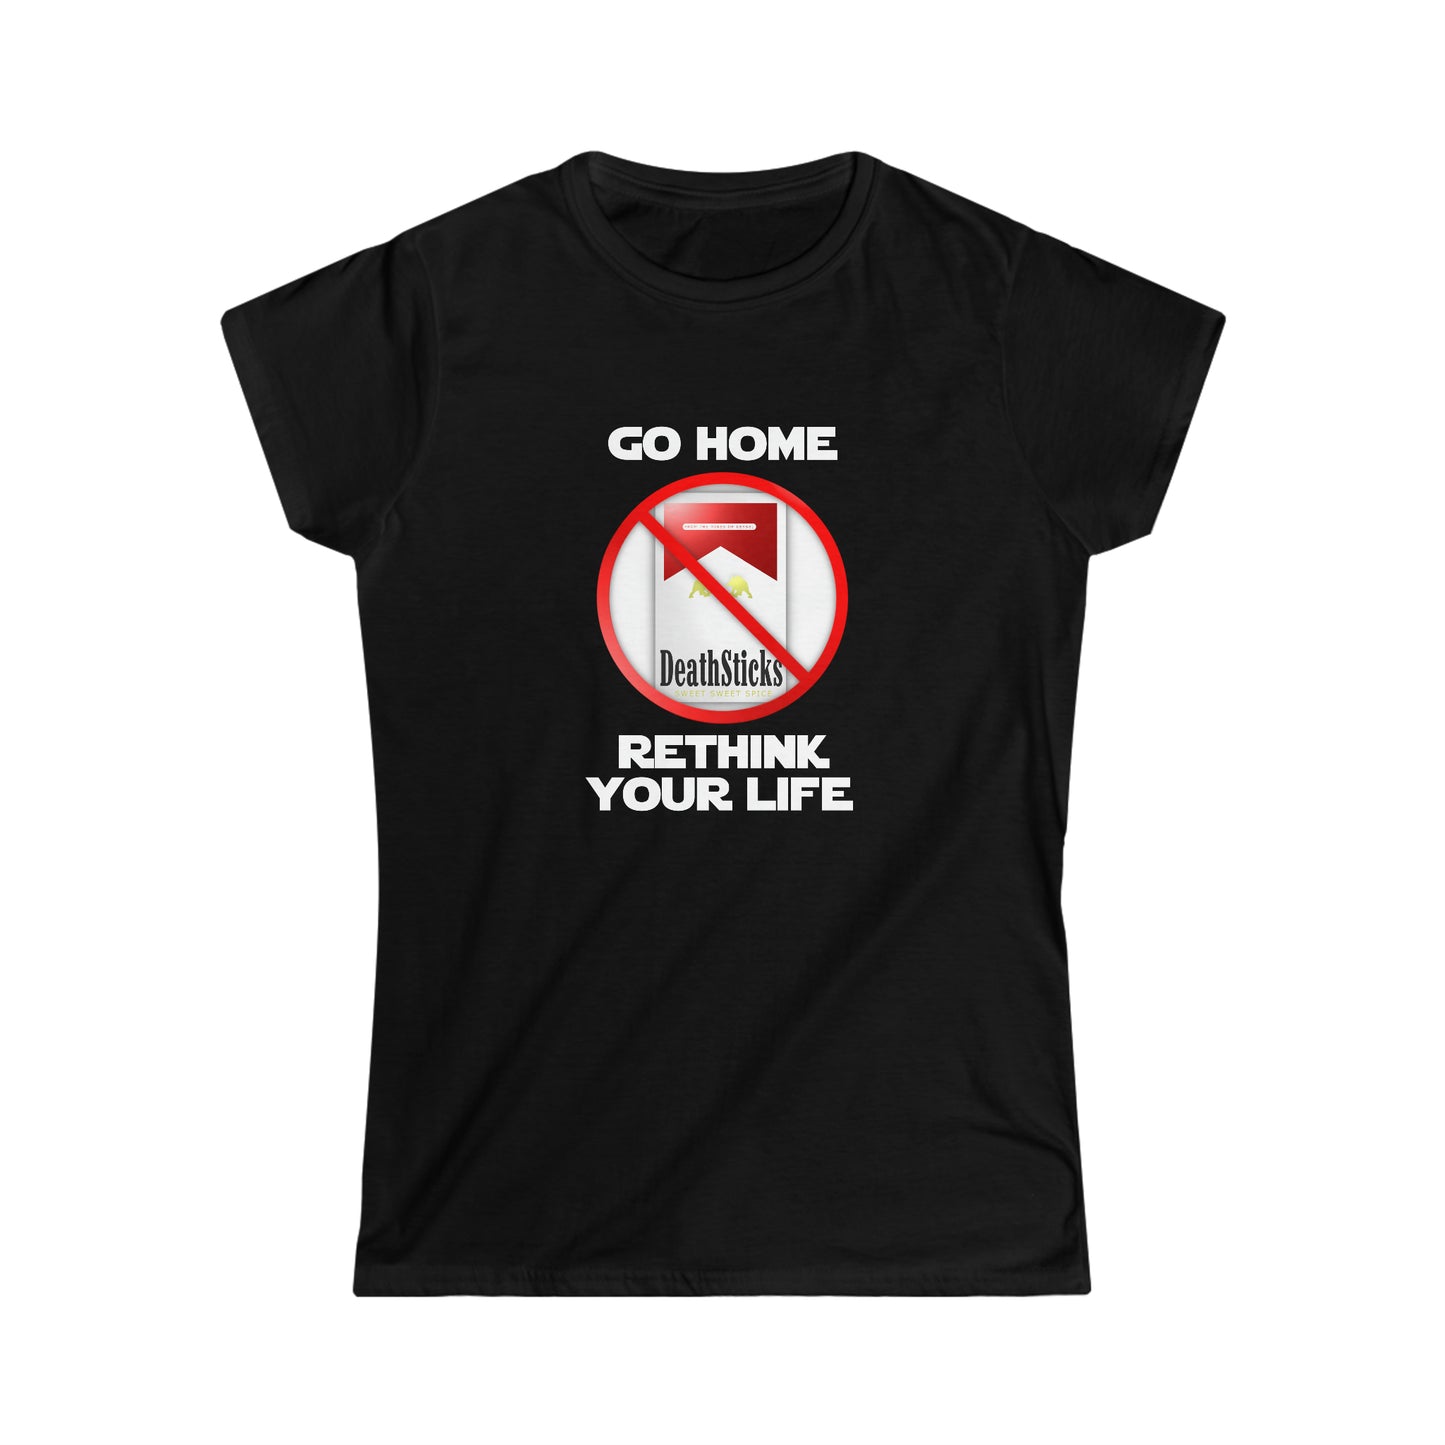 WOMEN'S CUT GO HOME AND RETHINK YOUR LIFE T-SHIRT